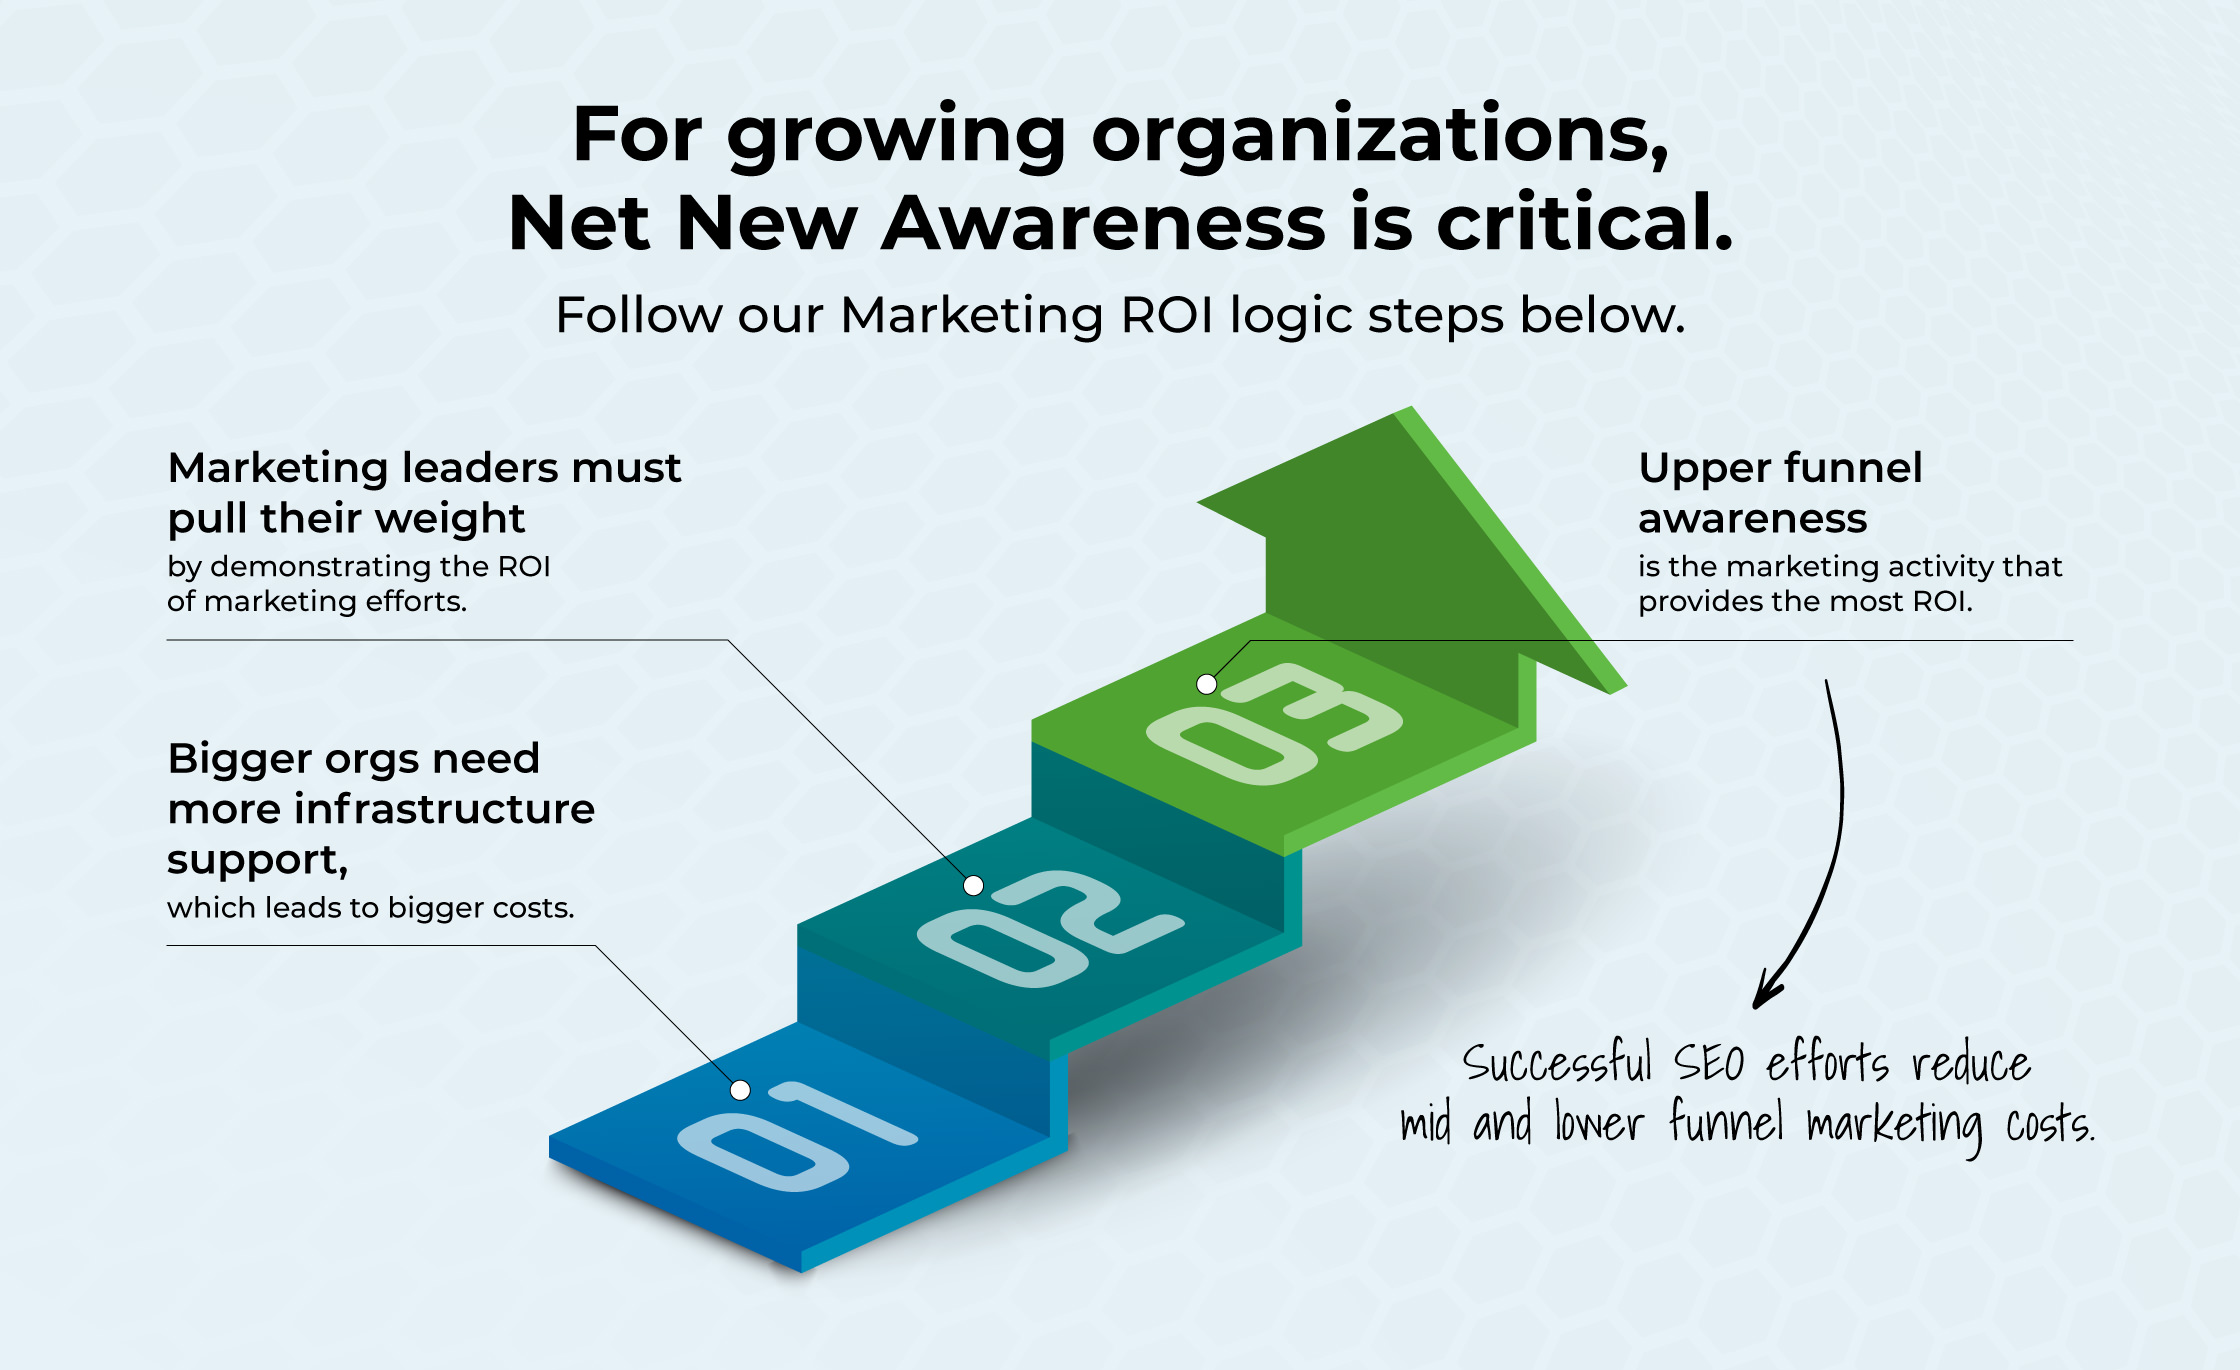 For growing organizations, Net New Awareness is critical.